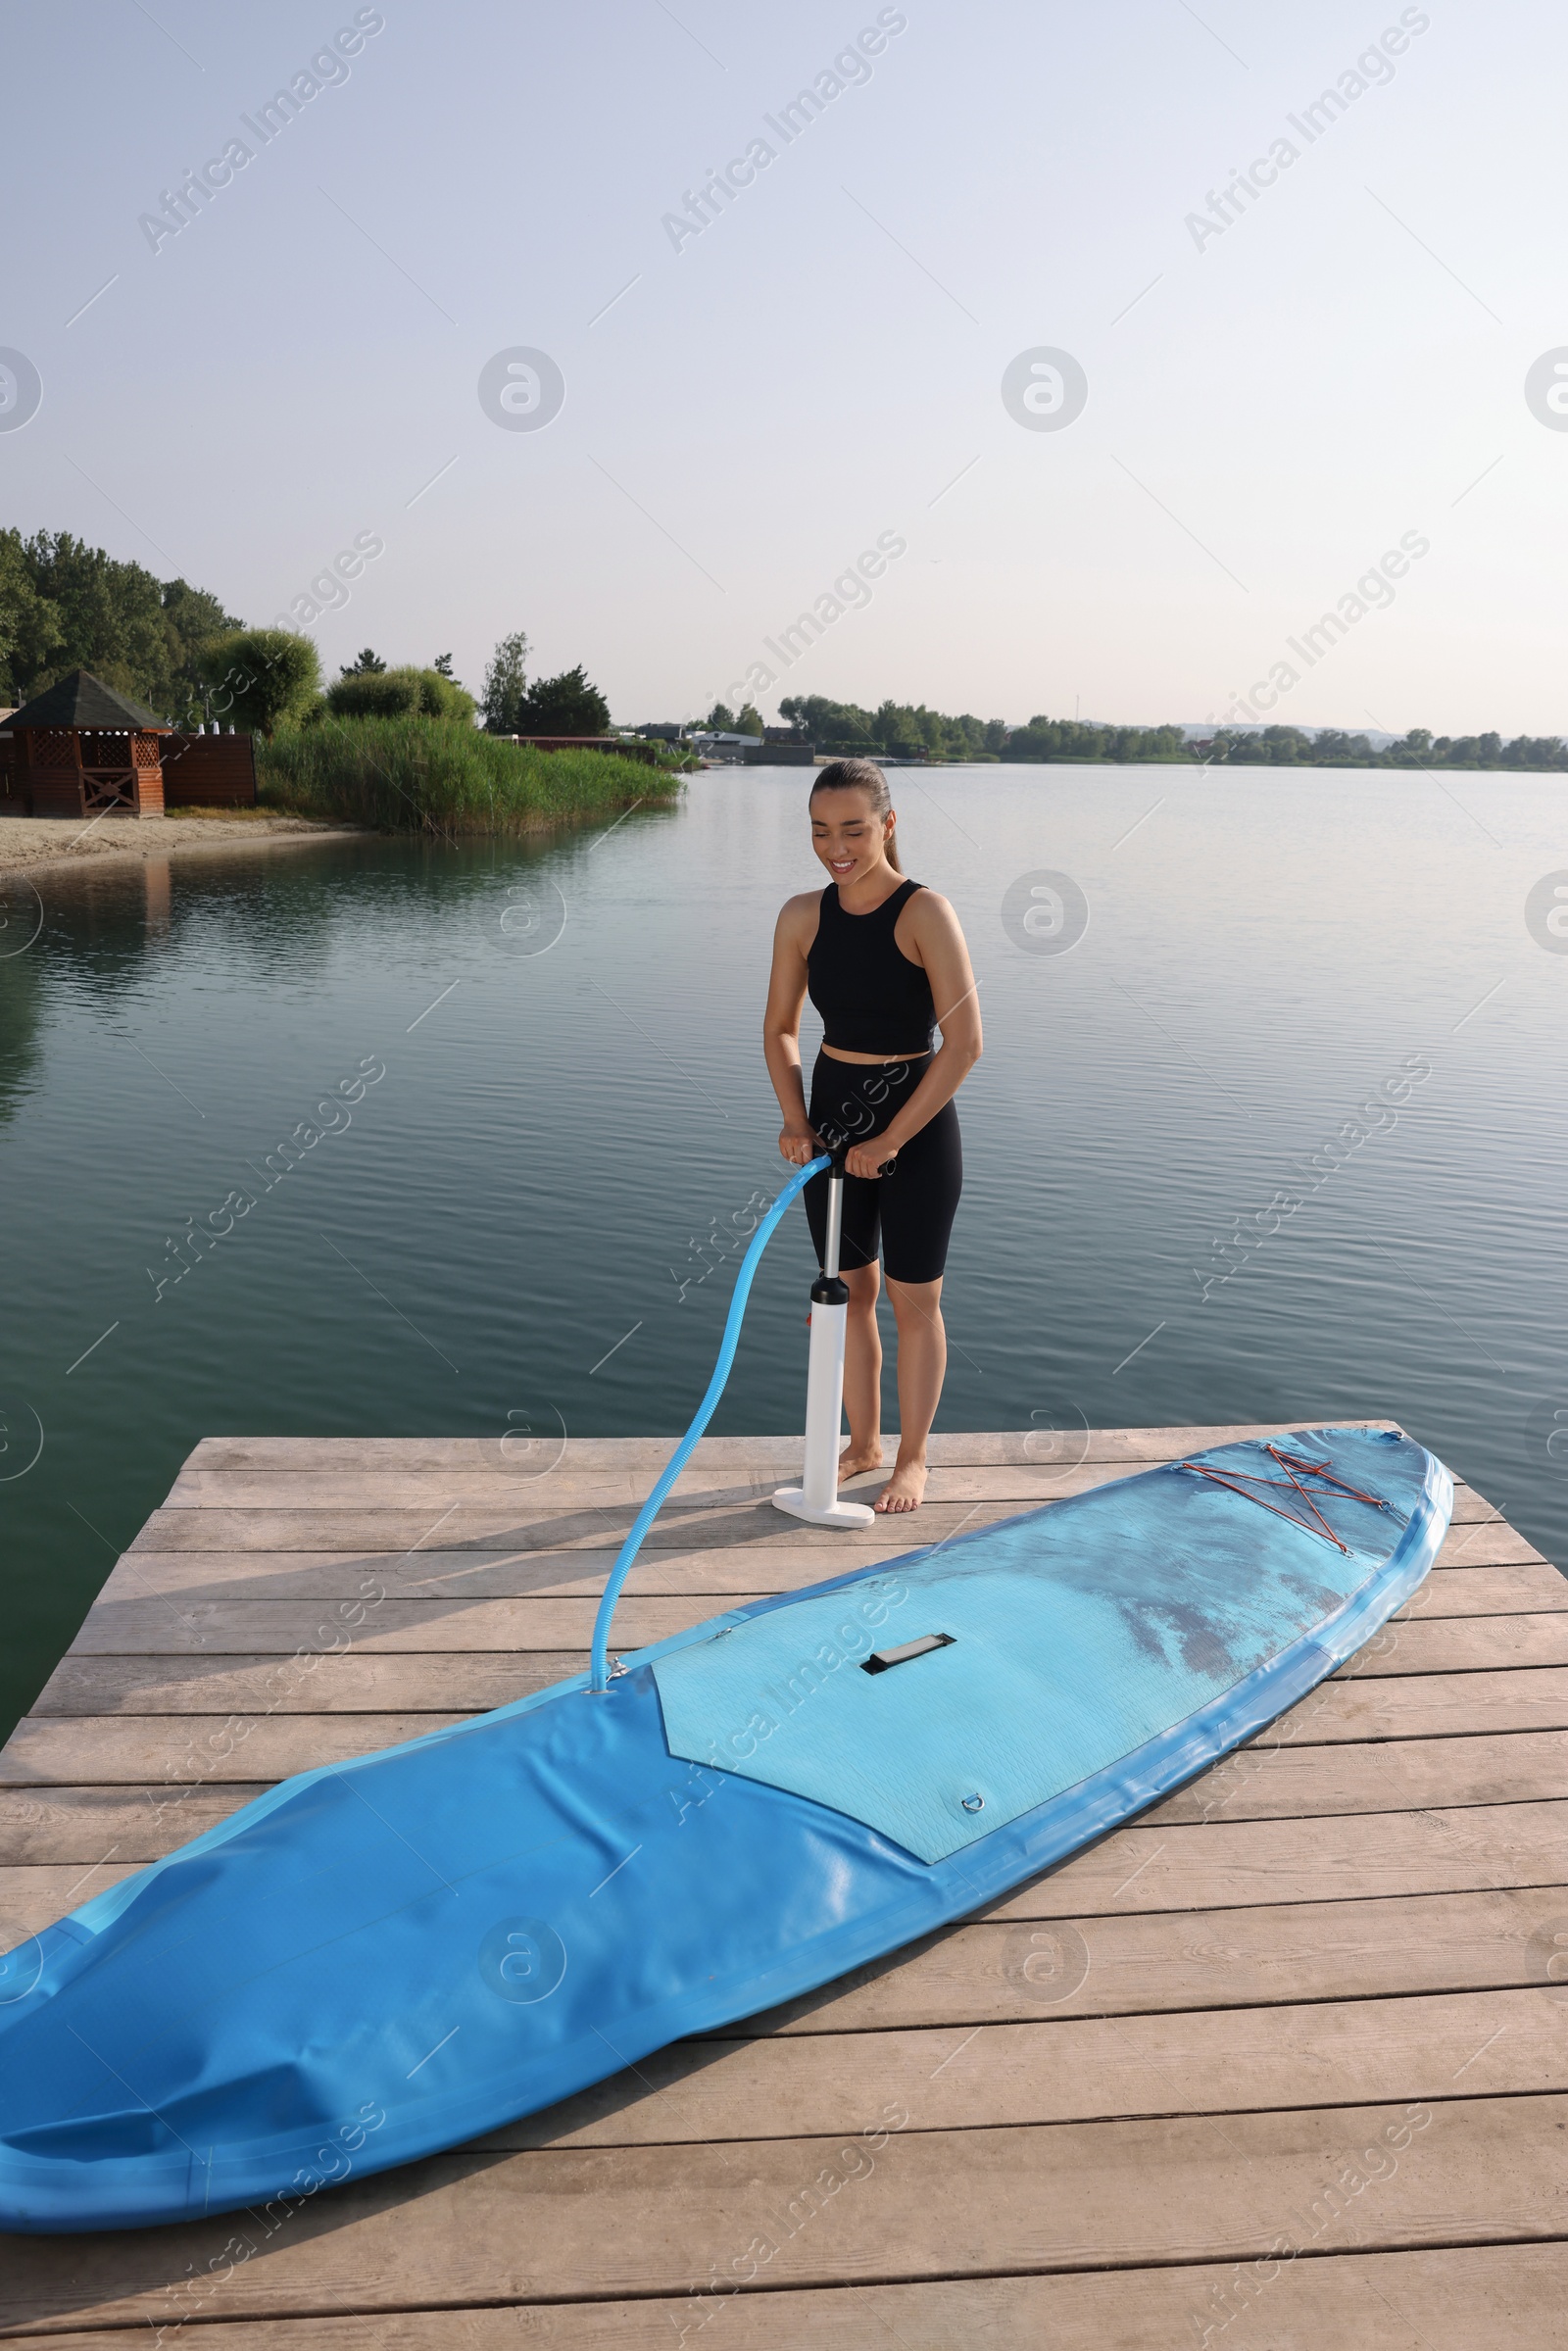 Photo of Woman pumping up SUP board on pier